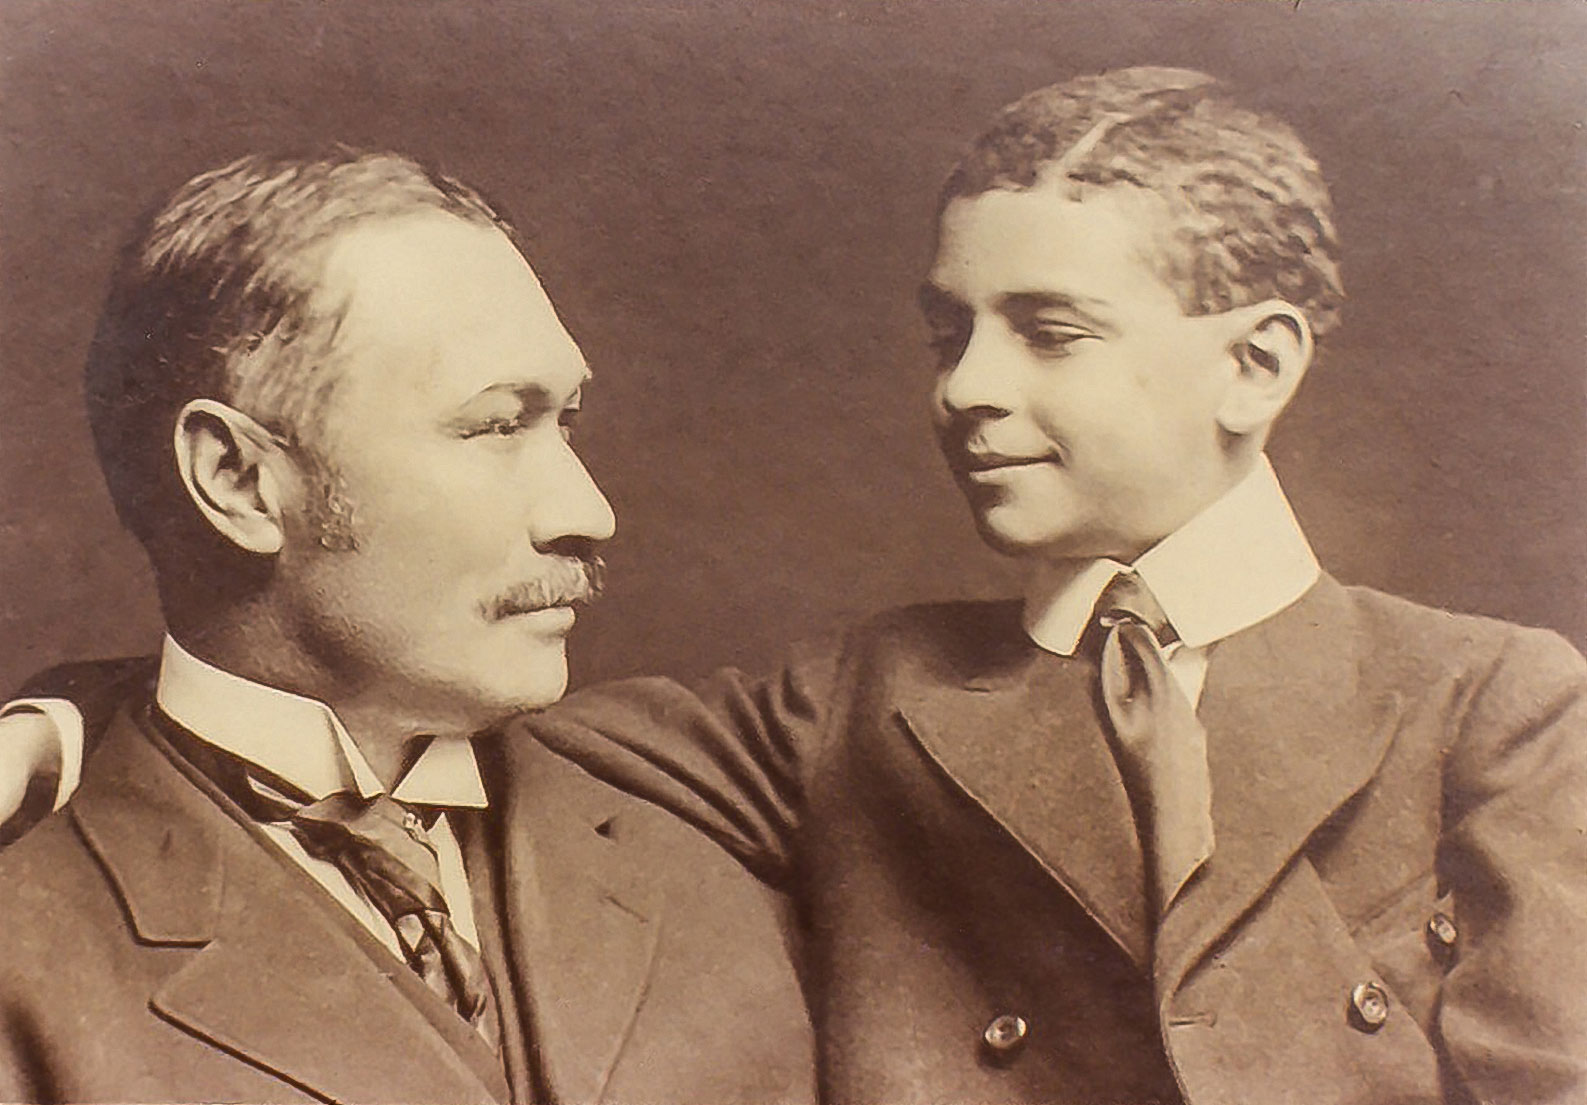 Atlanta Life Insurance Company founder, Alonzo Herndon and his son, Norris Herndon. Alonzo was a formerly enslaved man who went on to become a well-respected businessman and Atlanta’s first Black millionaire. Norris, following in his father’s footsteps, grew the company into a highly successful diversified insurance company through organic expansion and by acquiring smaller Black-owned insurance companies across the country.